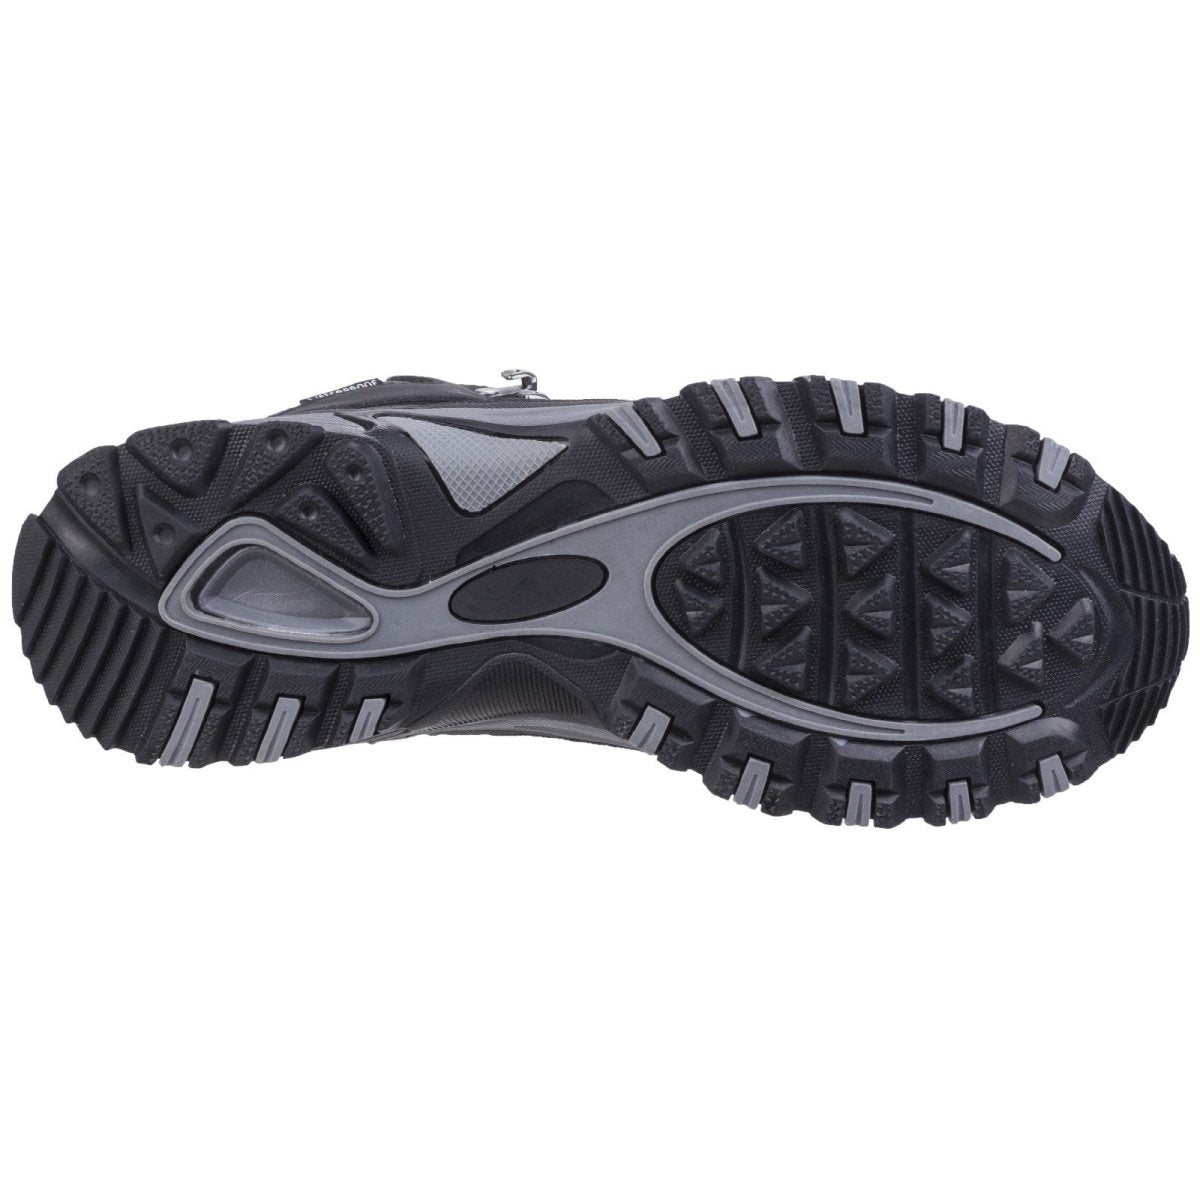 Cotswold Abbeydale Mid Mens Walking Hiking Boots - Shoe Store Direct